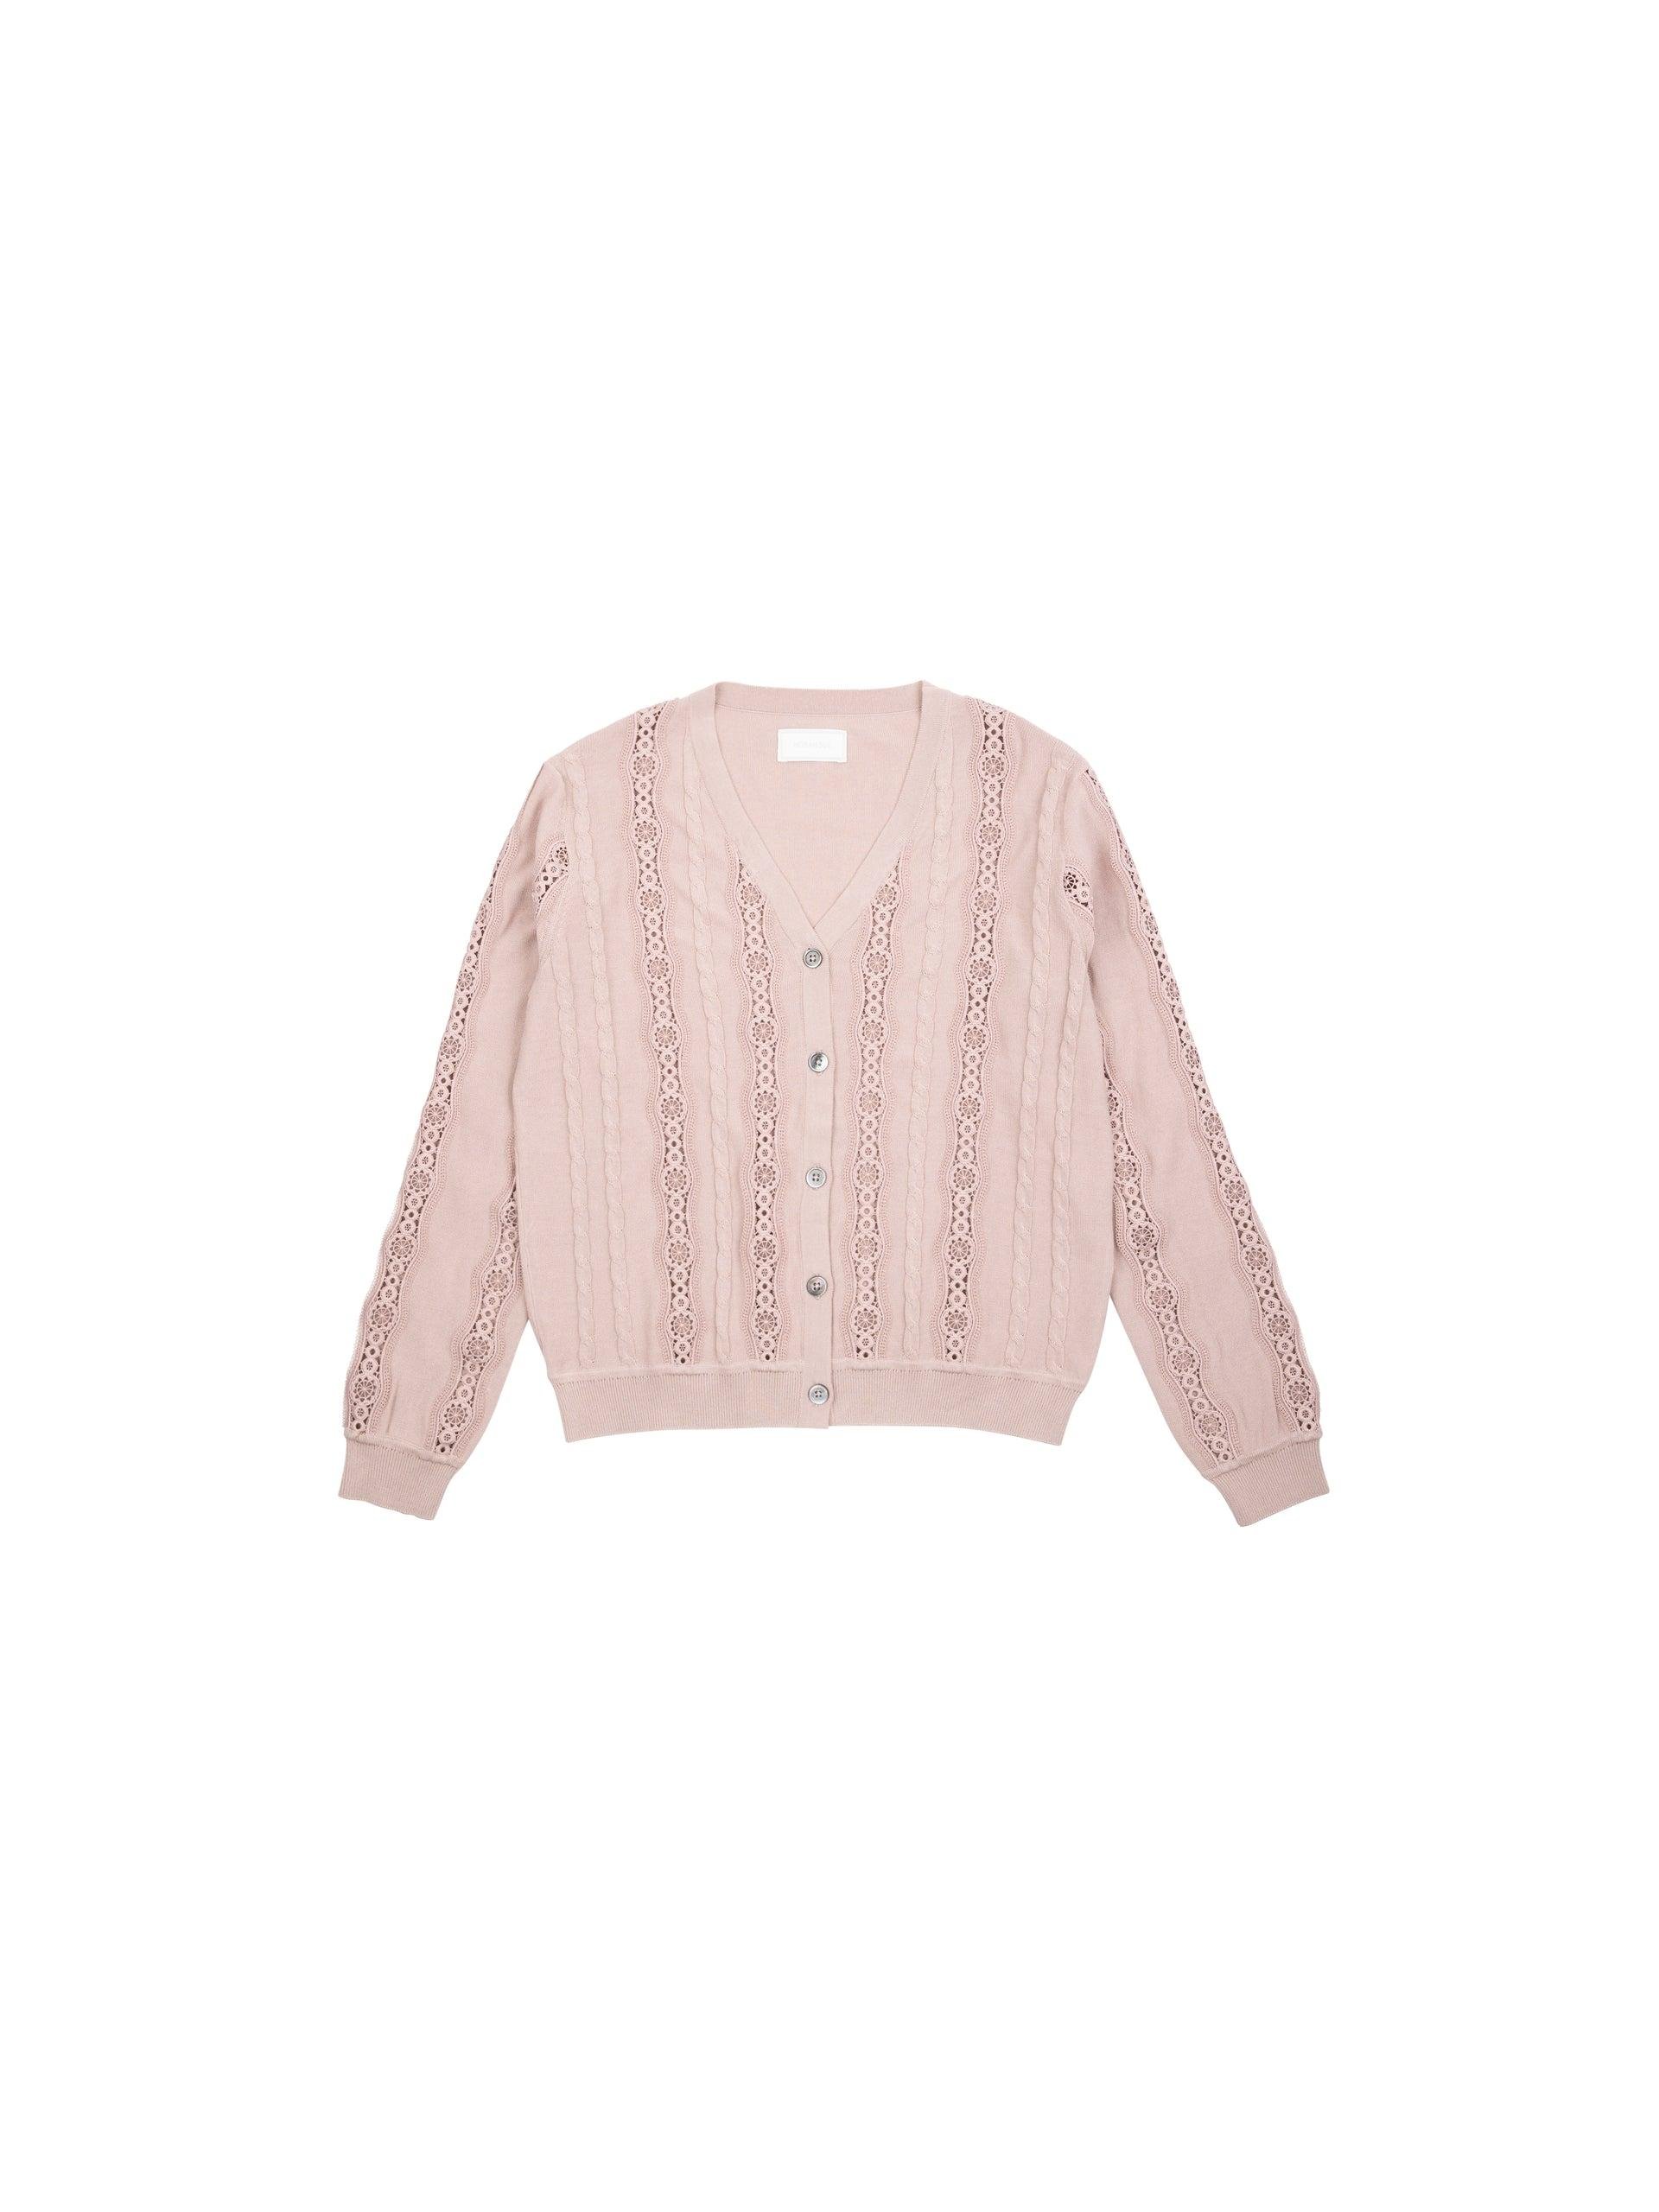 NORAH SUE Lace Trim Cardigan by COCKTAIL